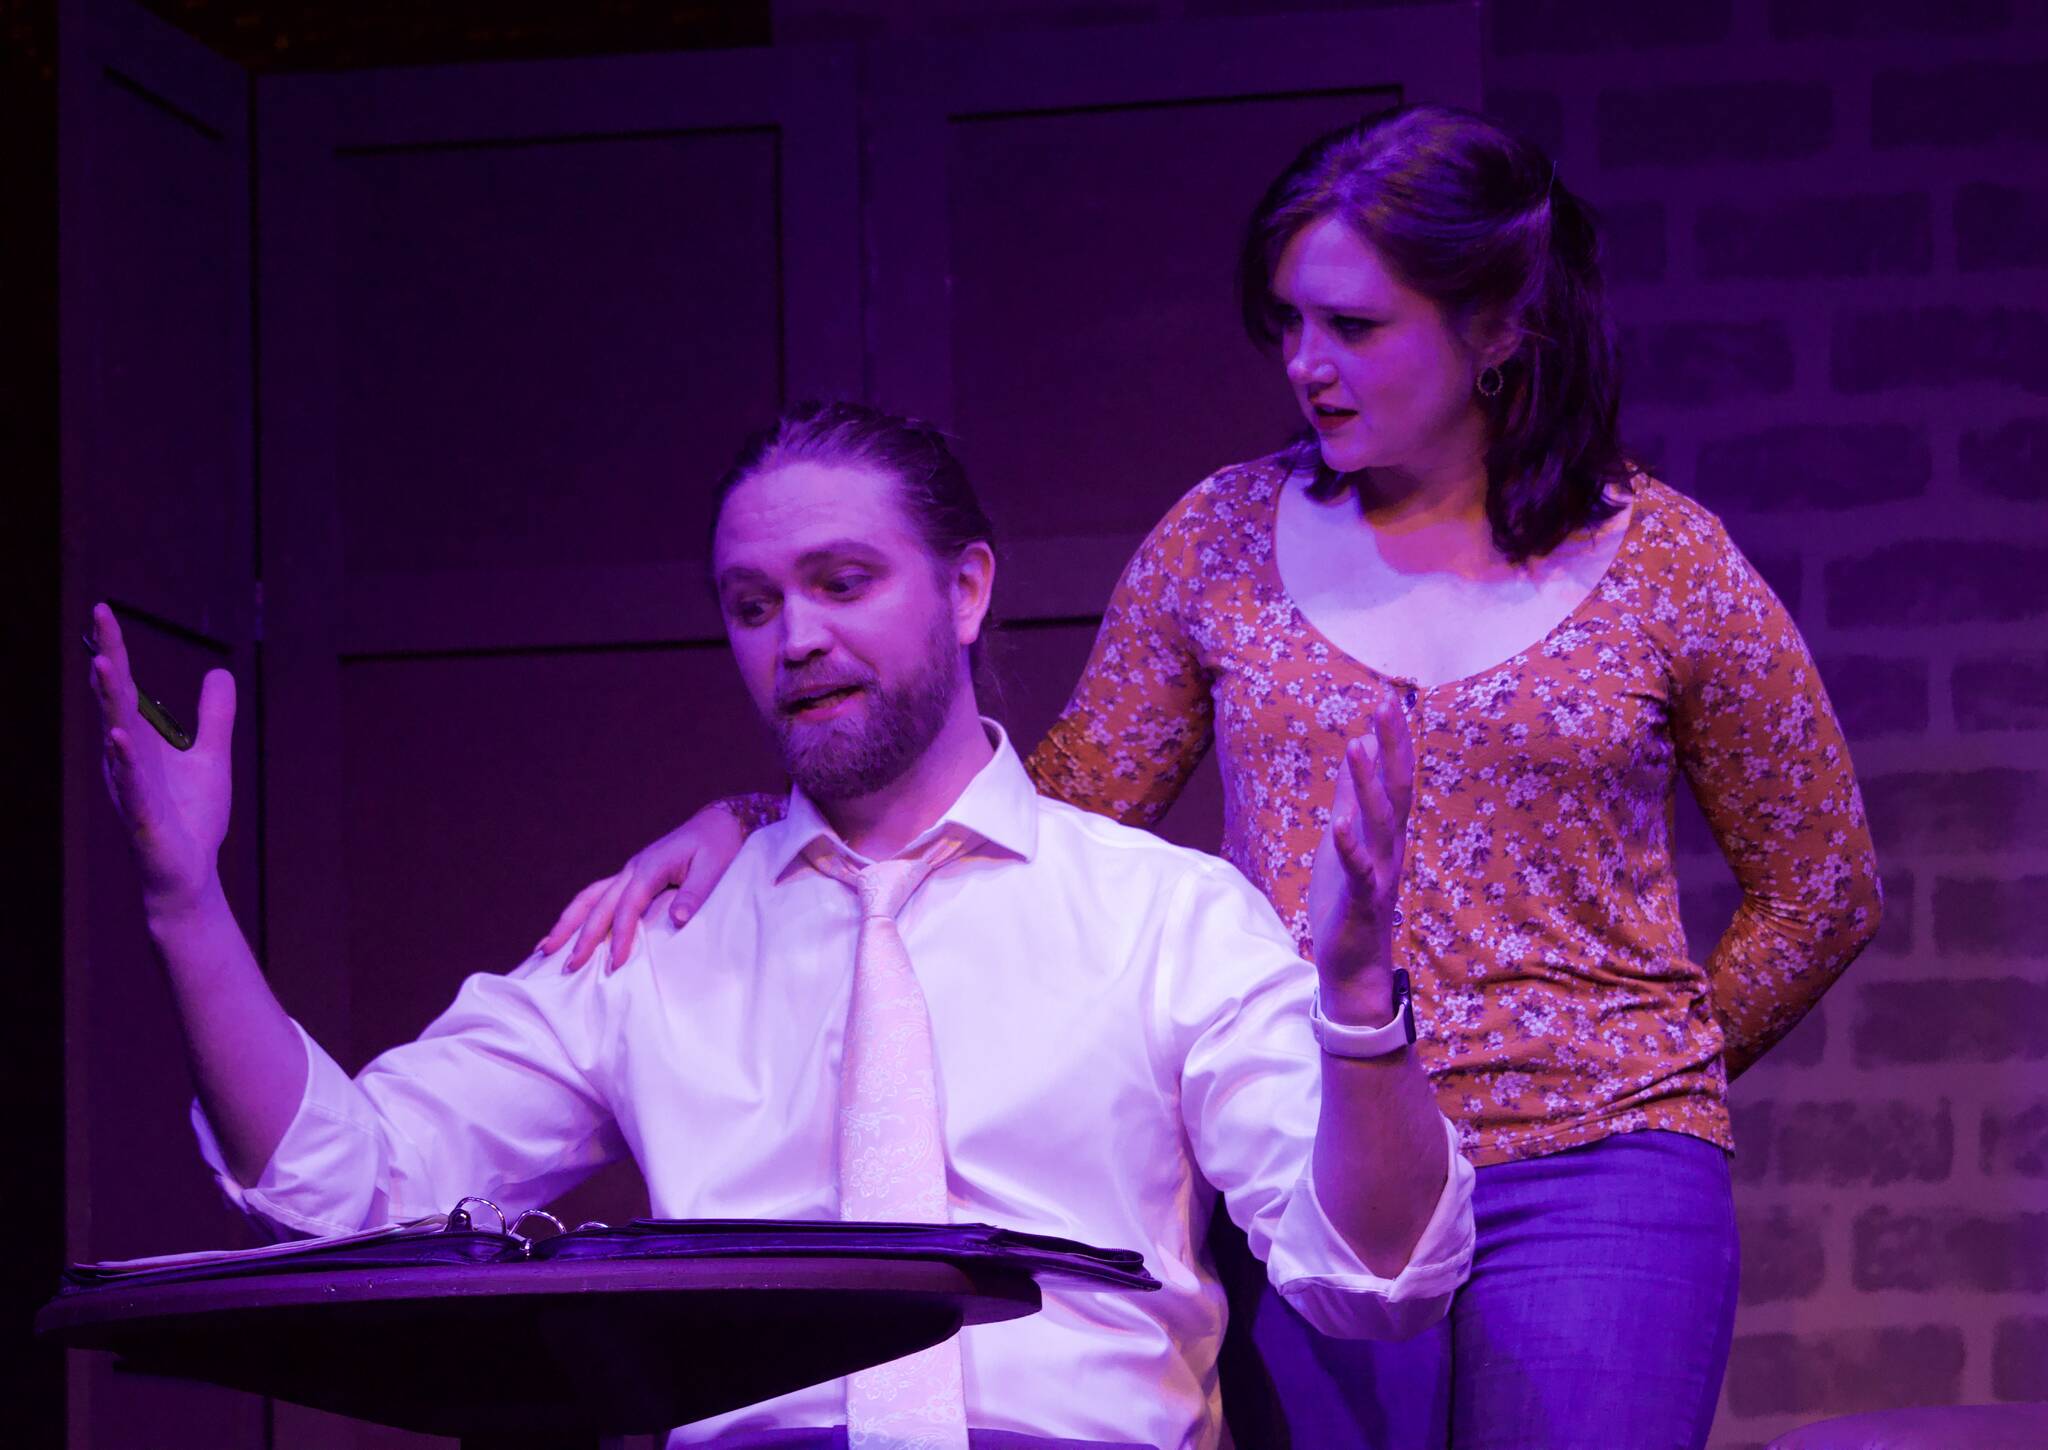 Photo by Rachel Rosen/Whidbey News-Times
David Thuet and Anna Schenck play David Ames and Sarah McKeon in “Earth and Sky.” David Ames is found dead after the couple’s whirlwind romance.